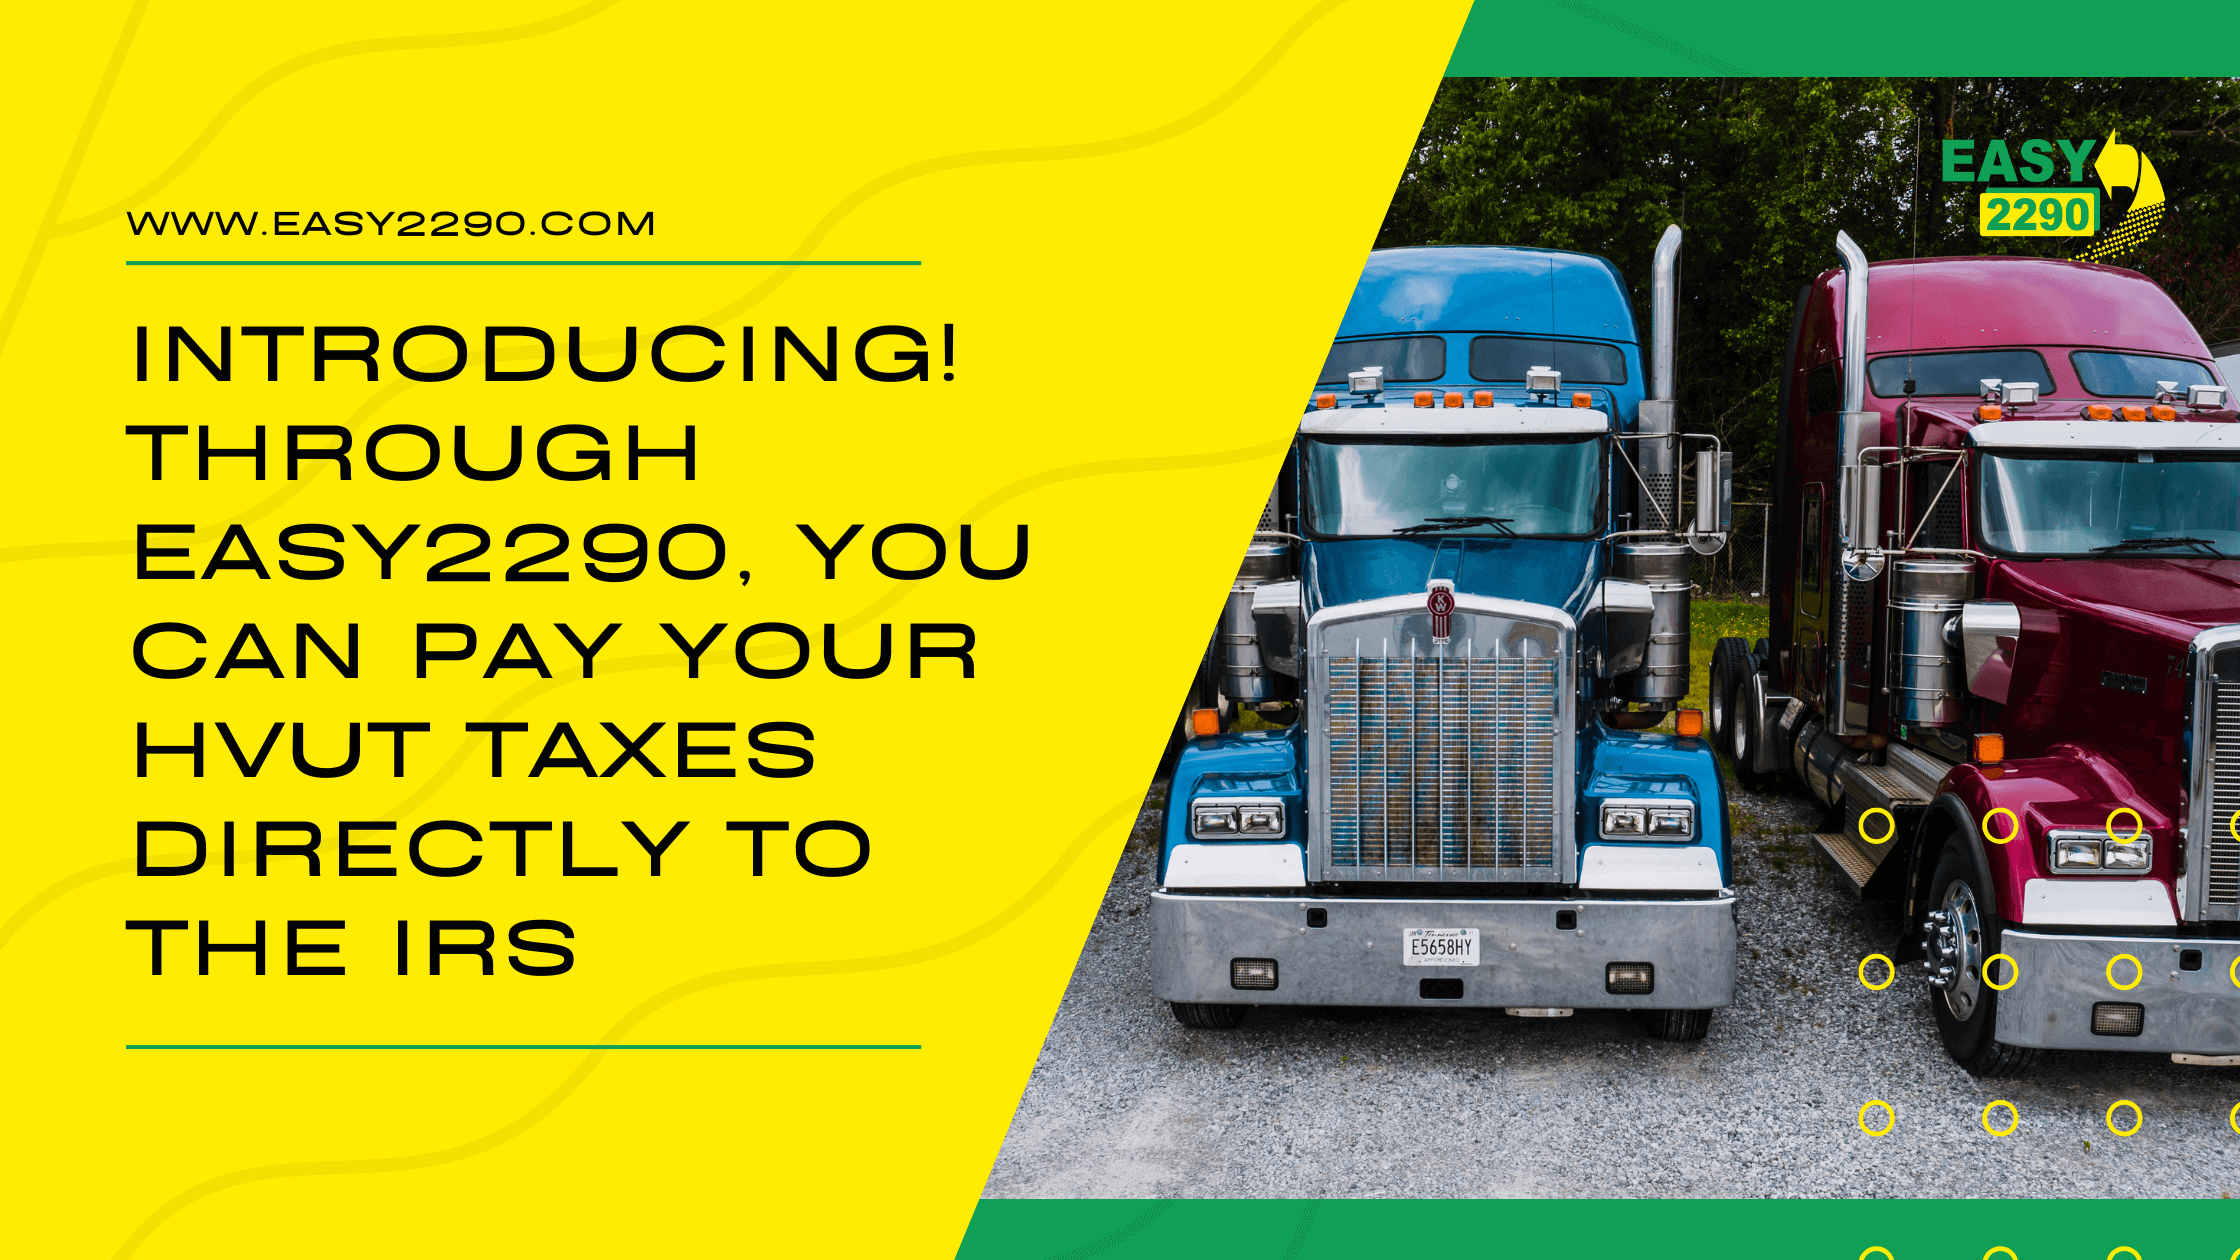 Introducing! Through Easy2290, you can pay your HVUT taxes directly to the IRS